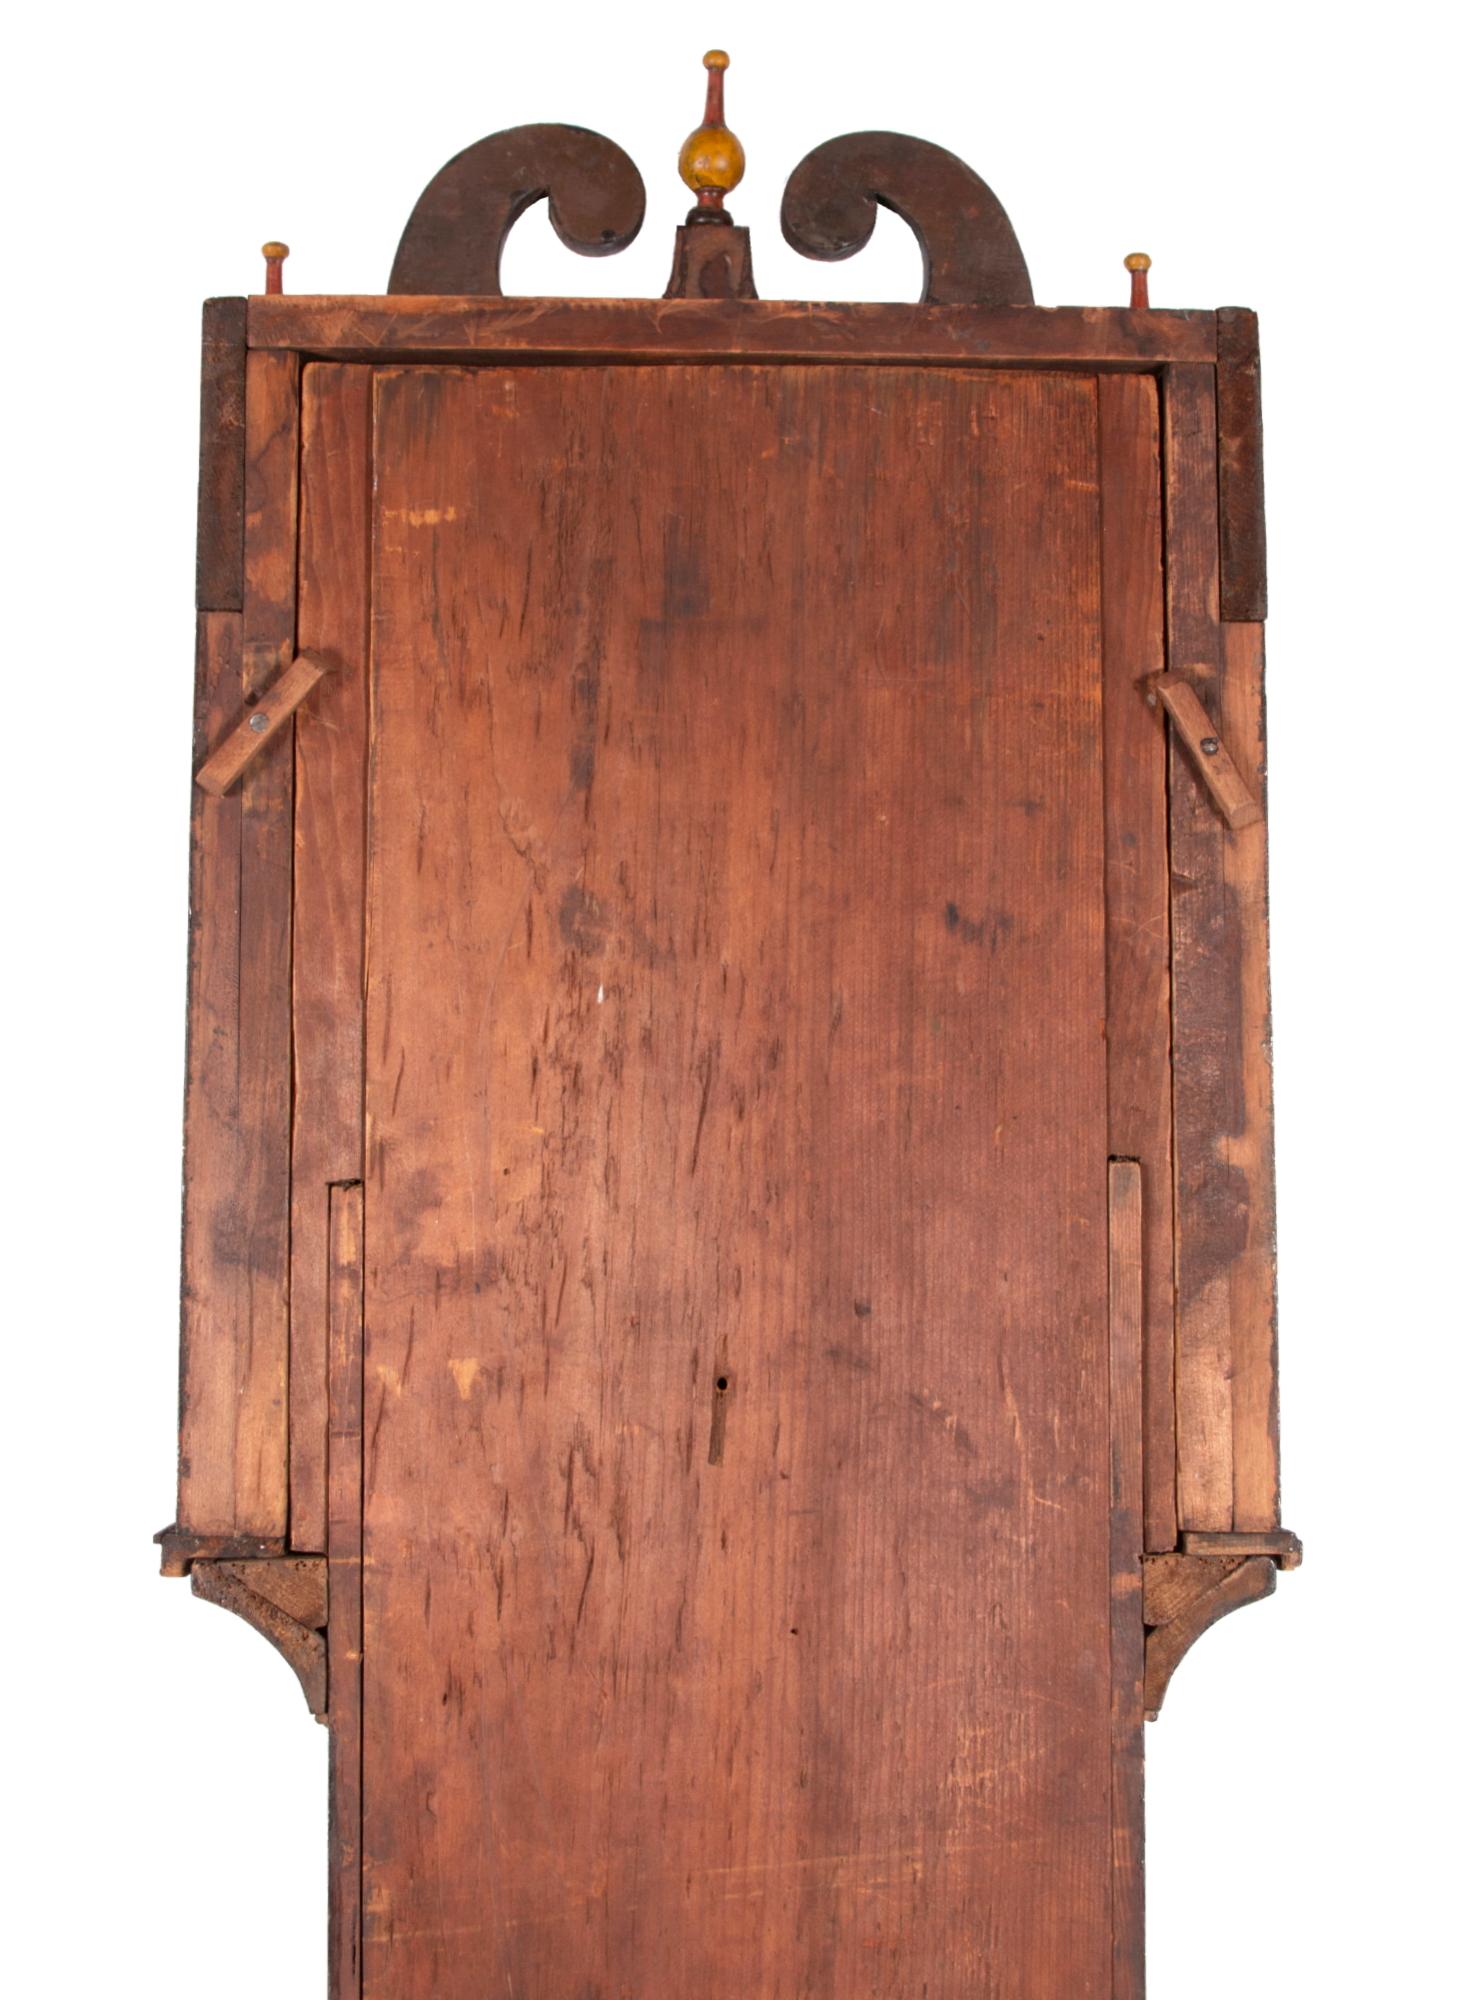 New England Tall Case Clock, Wooden Works by Riley Whiting, ca 1819-1835 For Sale 2